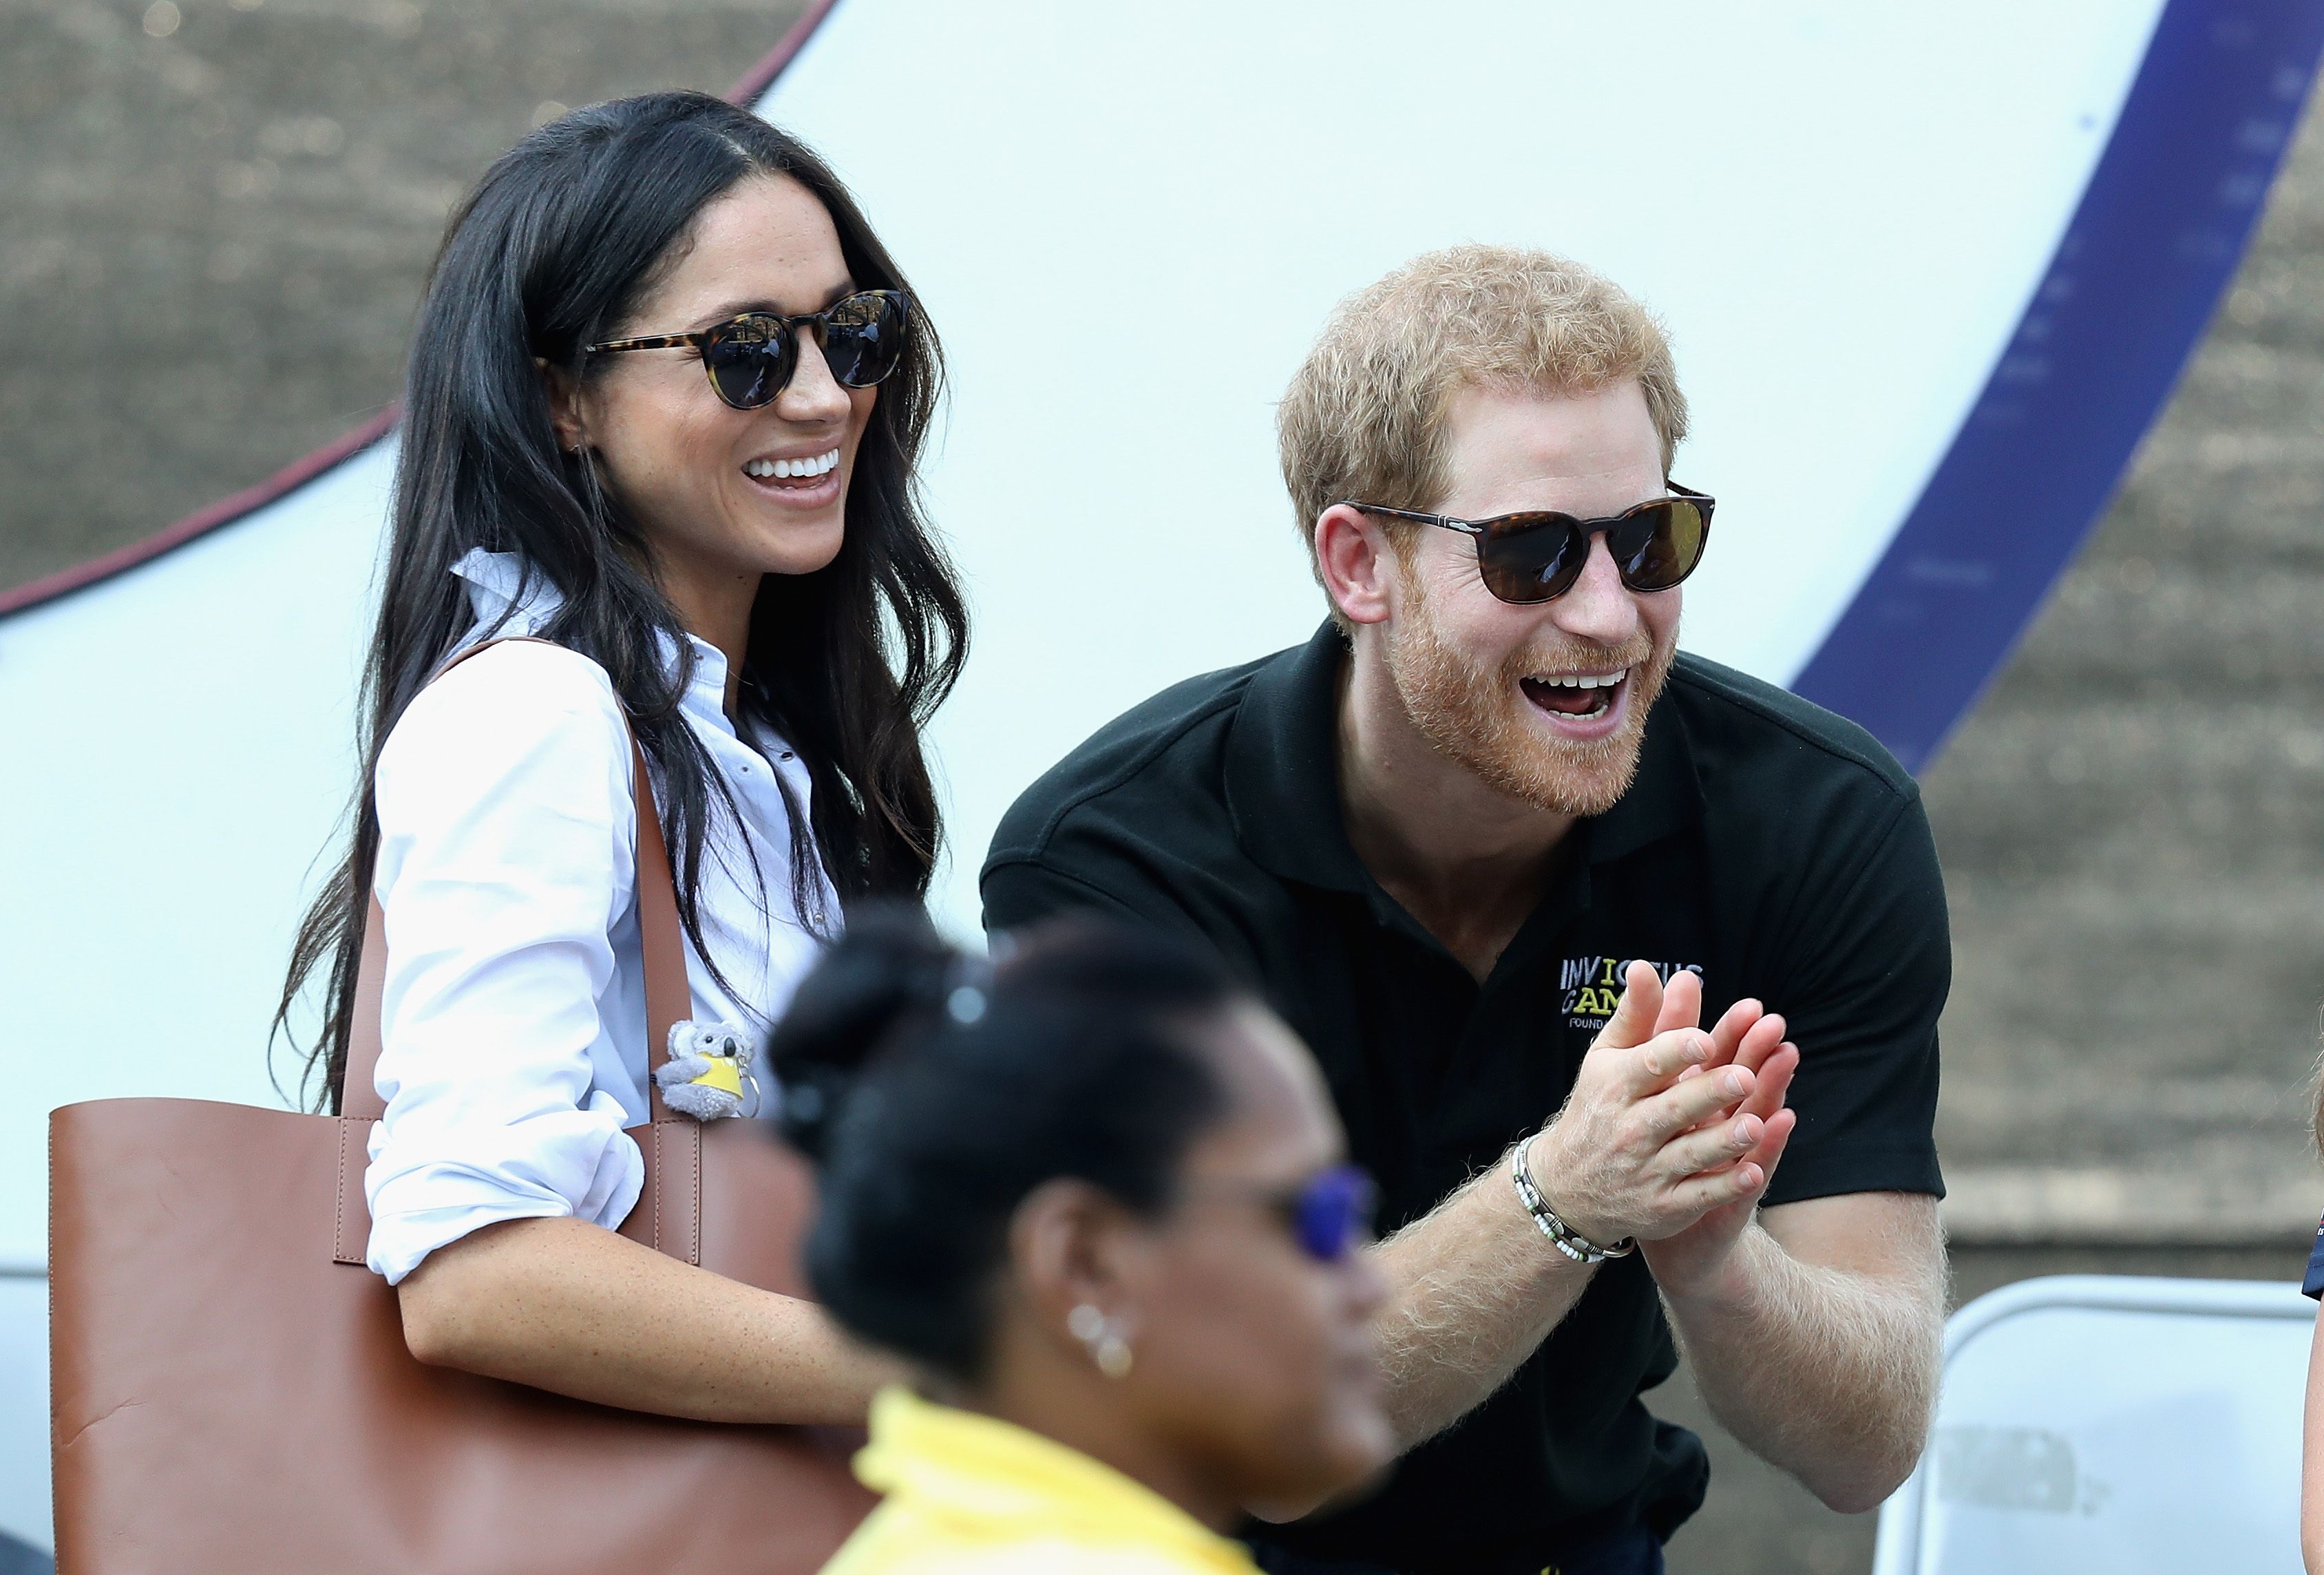 Prince Harry and Meghan Markle at a Wheelchair Tennis match during the Invictus Games 2017 at Nathan Philips Square on September 25, 2017 in Toronto, Canada | Photo: Getty Images